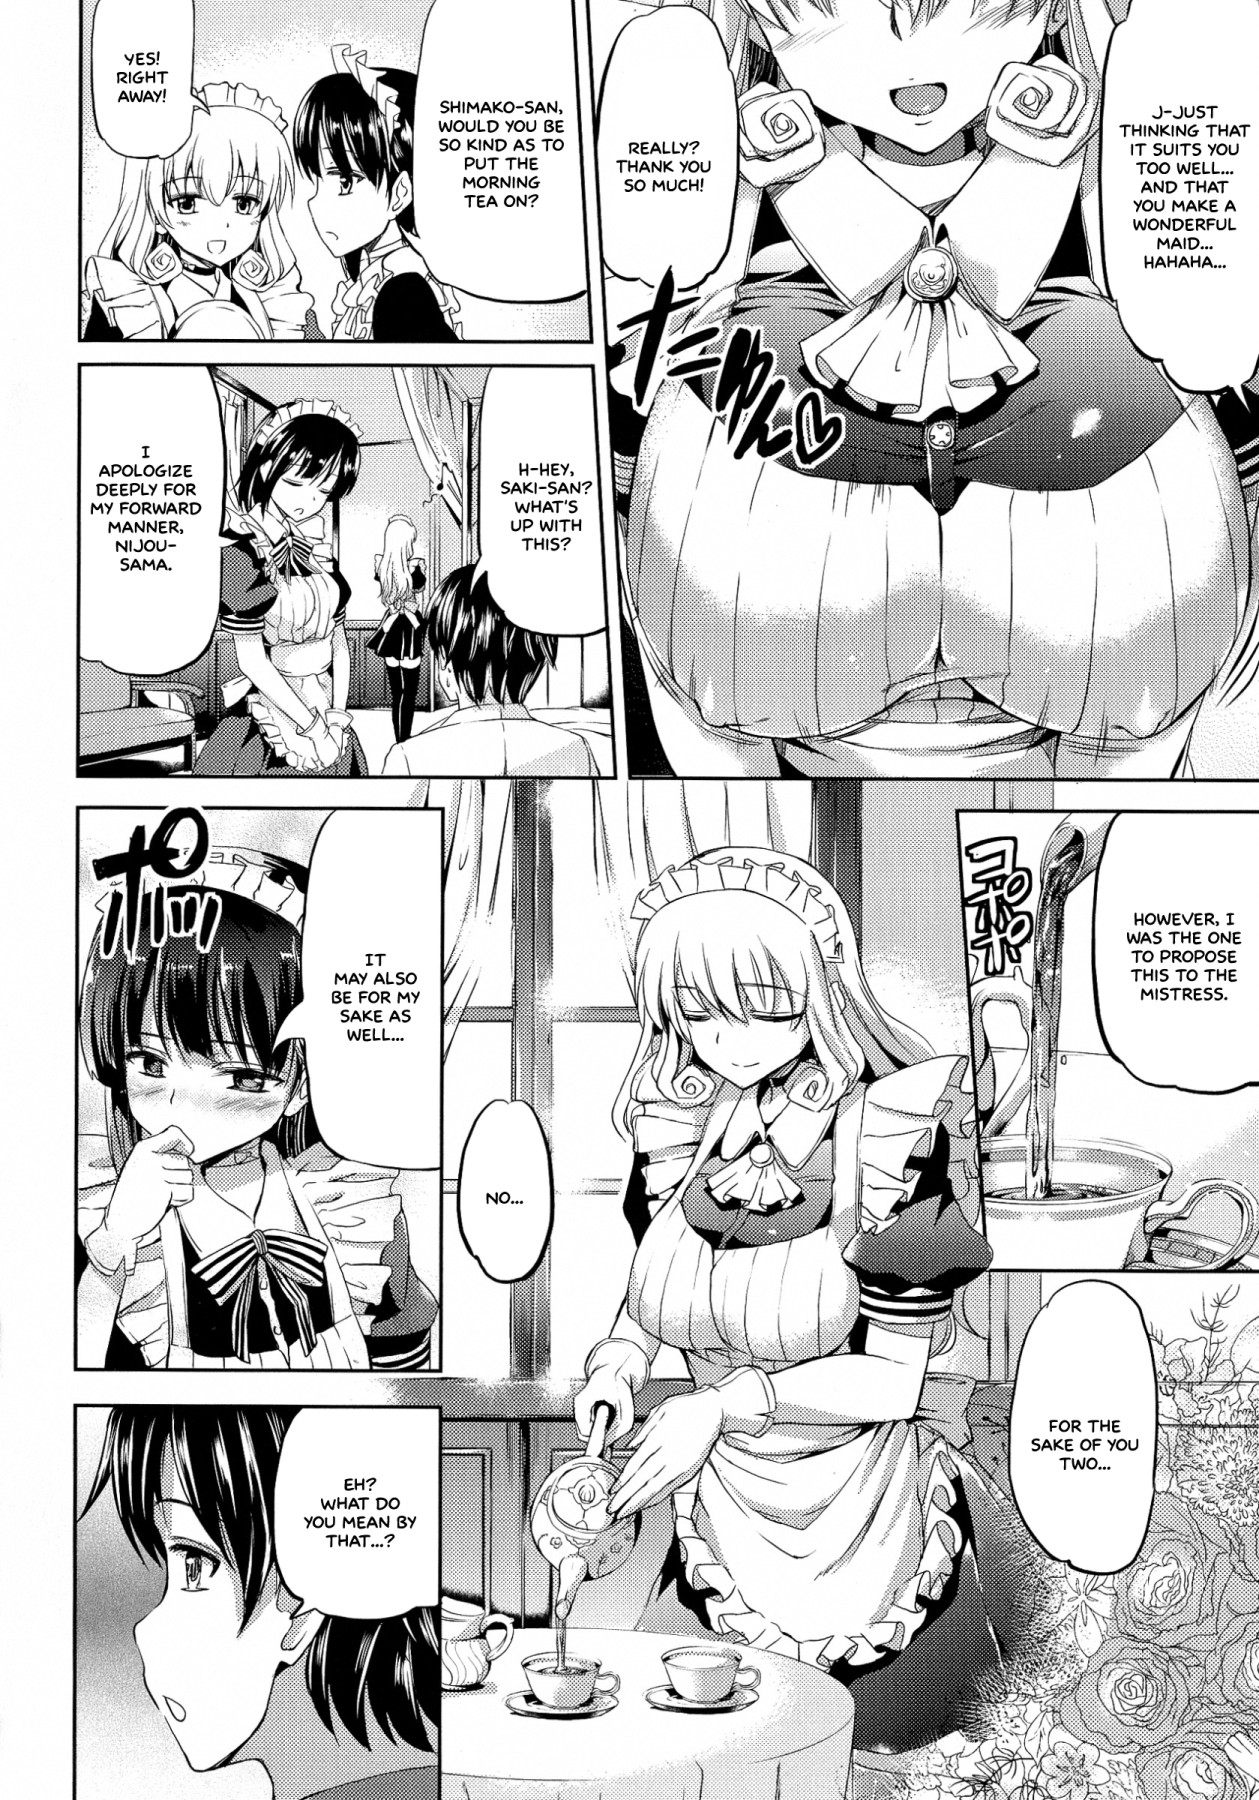 Hentai Manga Comic-The Young Lady's Maid Situation-Chapter 9-4